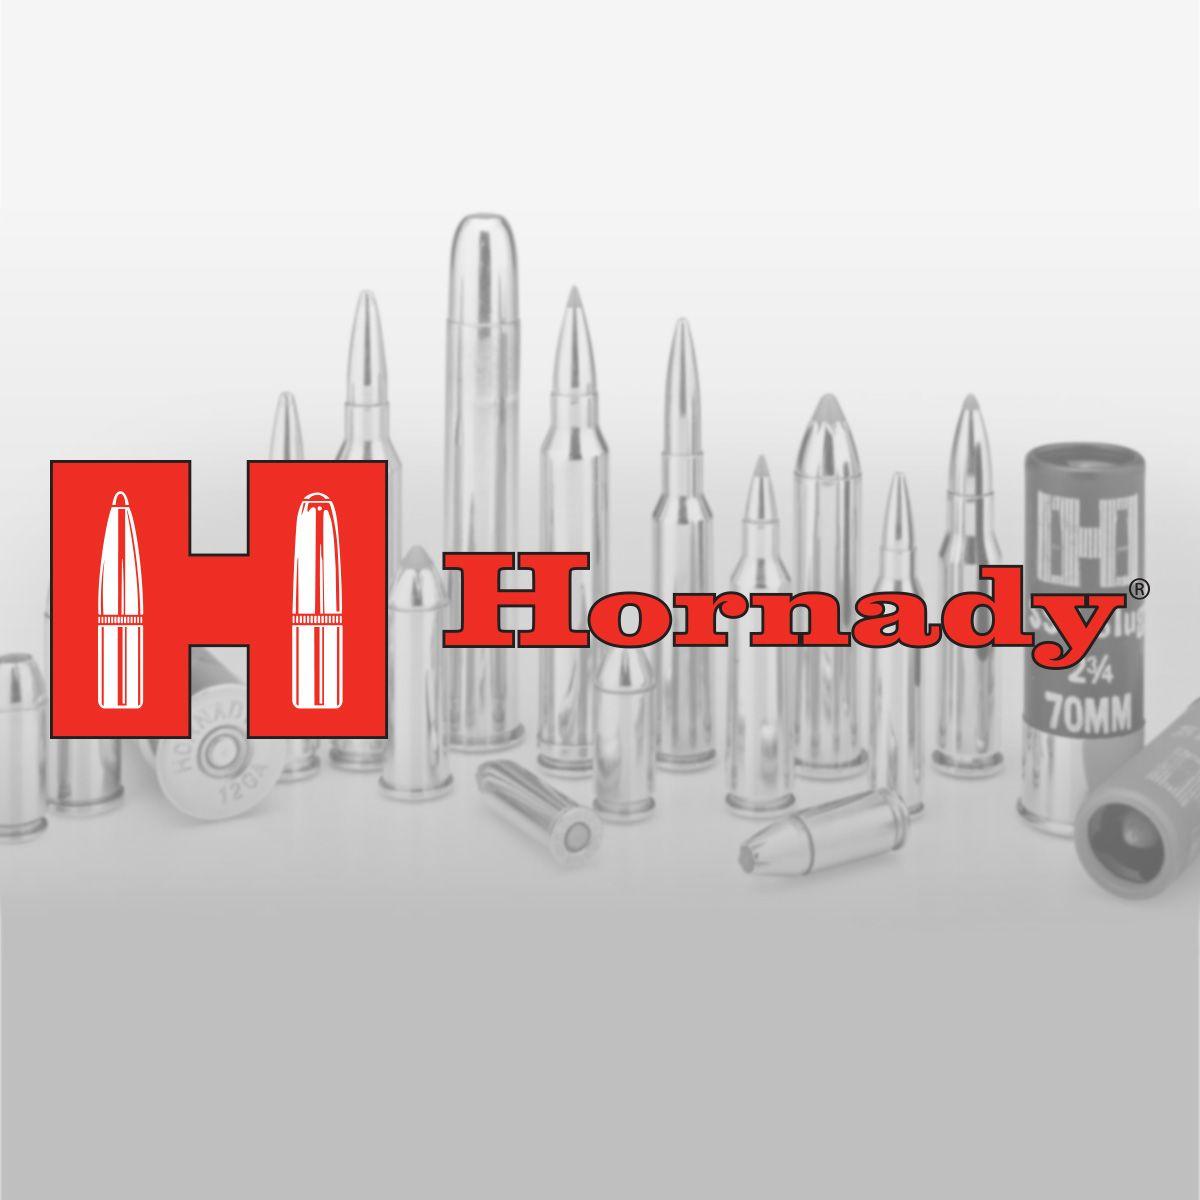 Team Hornady Logo - Accurate, Deadly, Dependable Manufacturing, Inc